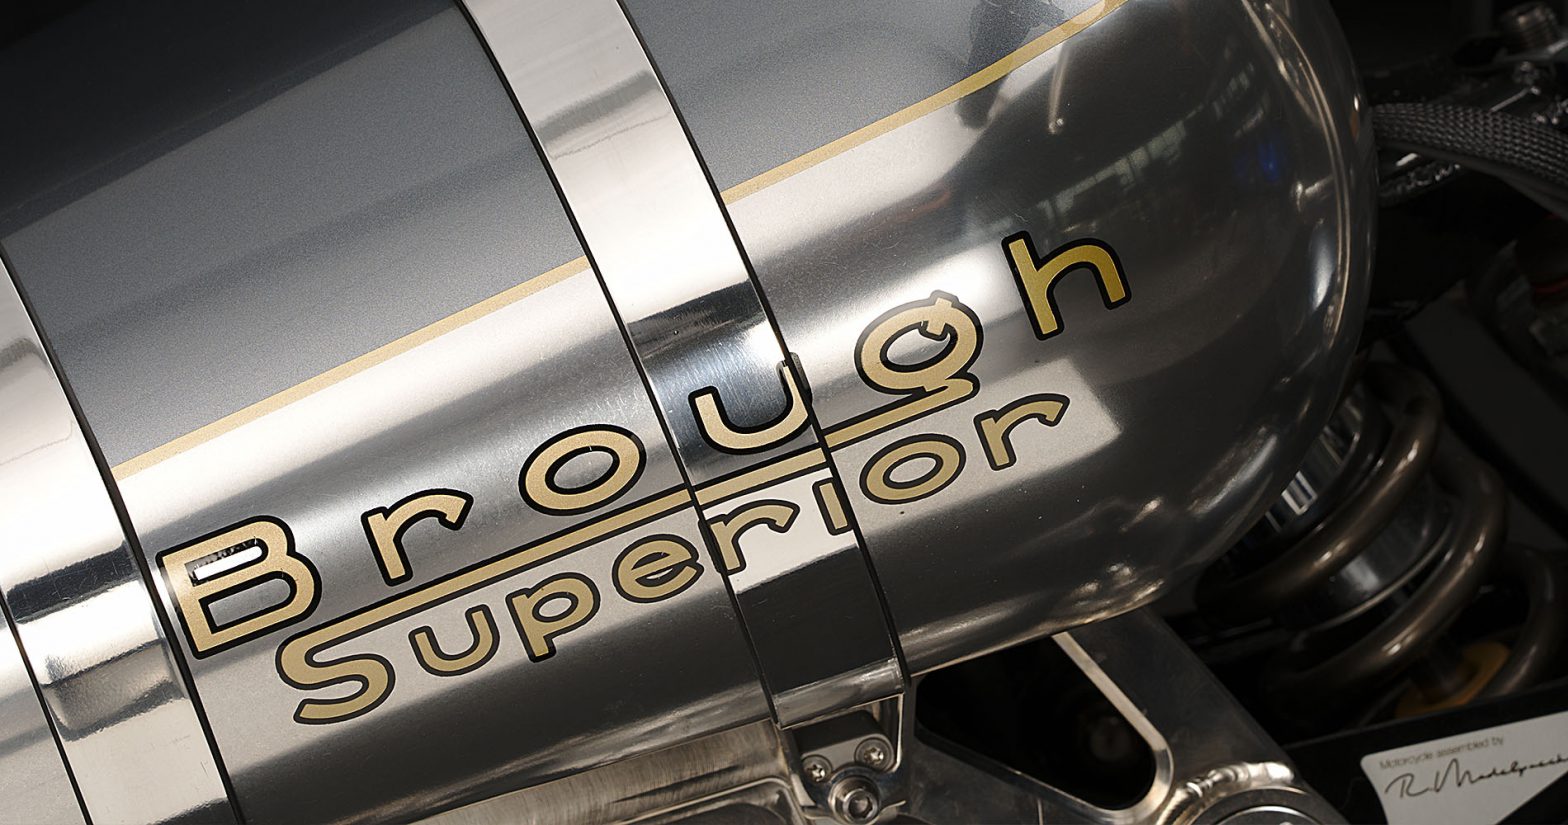 May 2020 – Australia and New Zealand Brough Superior Newsletter